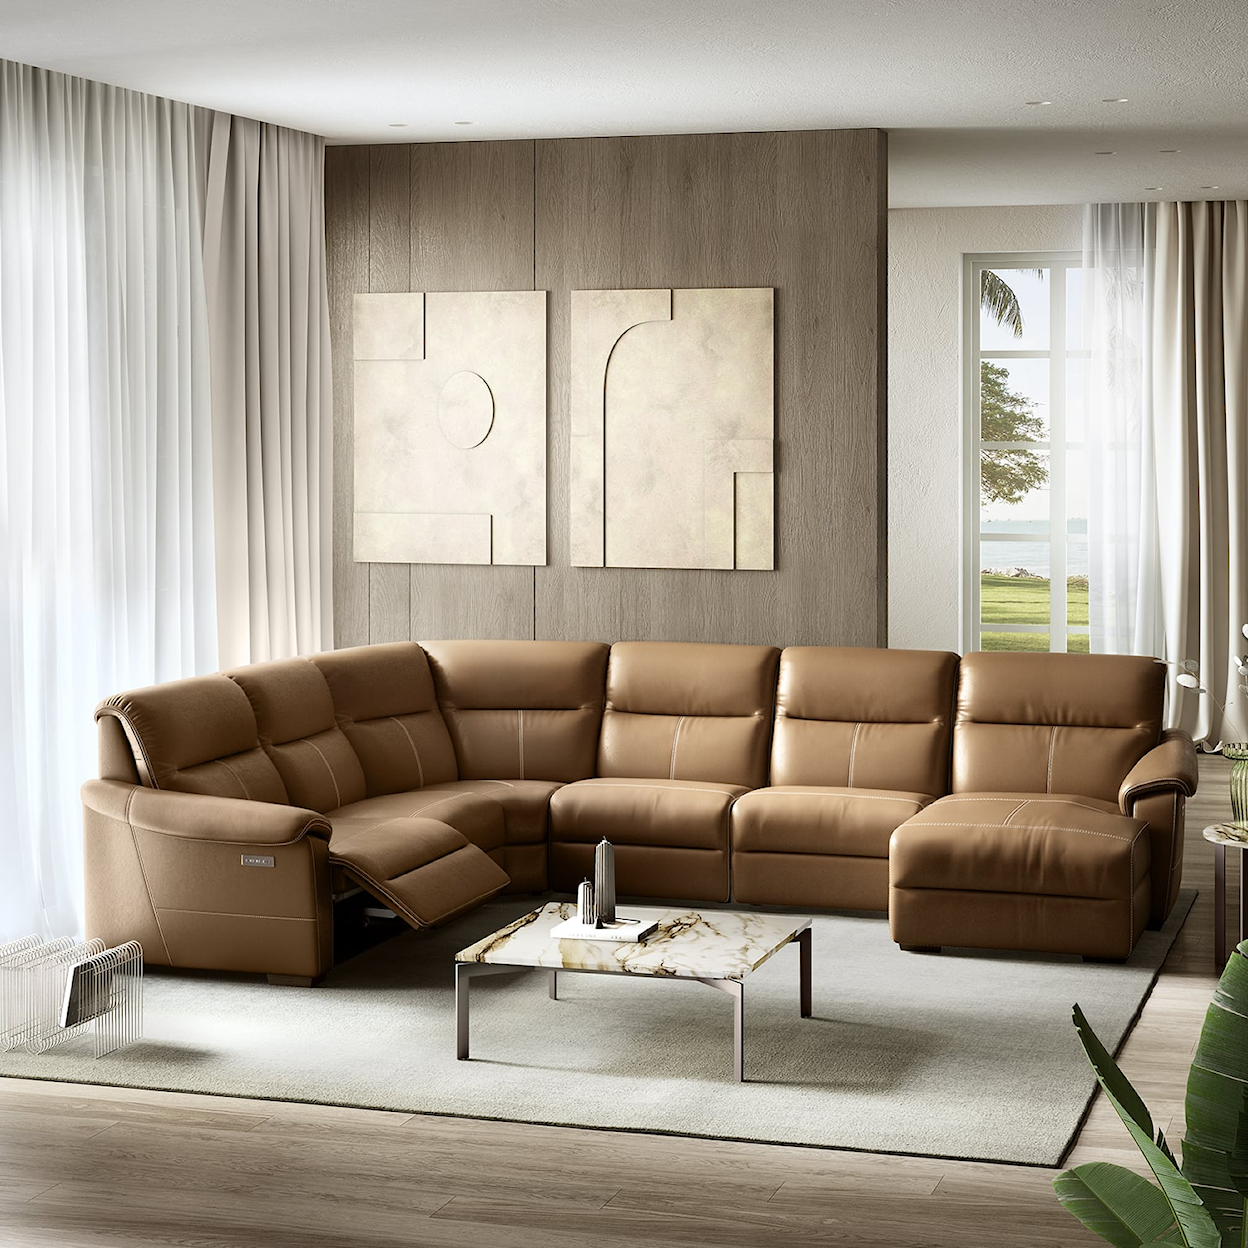 Natuzzi Editions Potenza Potenza L-Shaped Sectional with Right Chaise